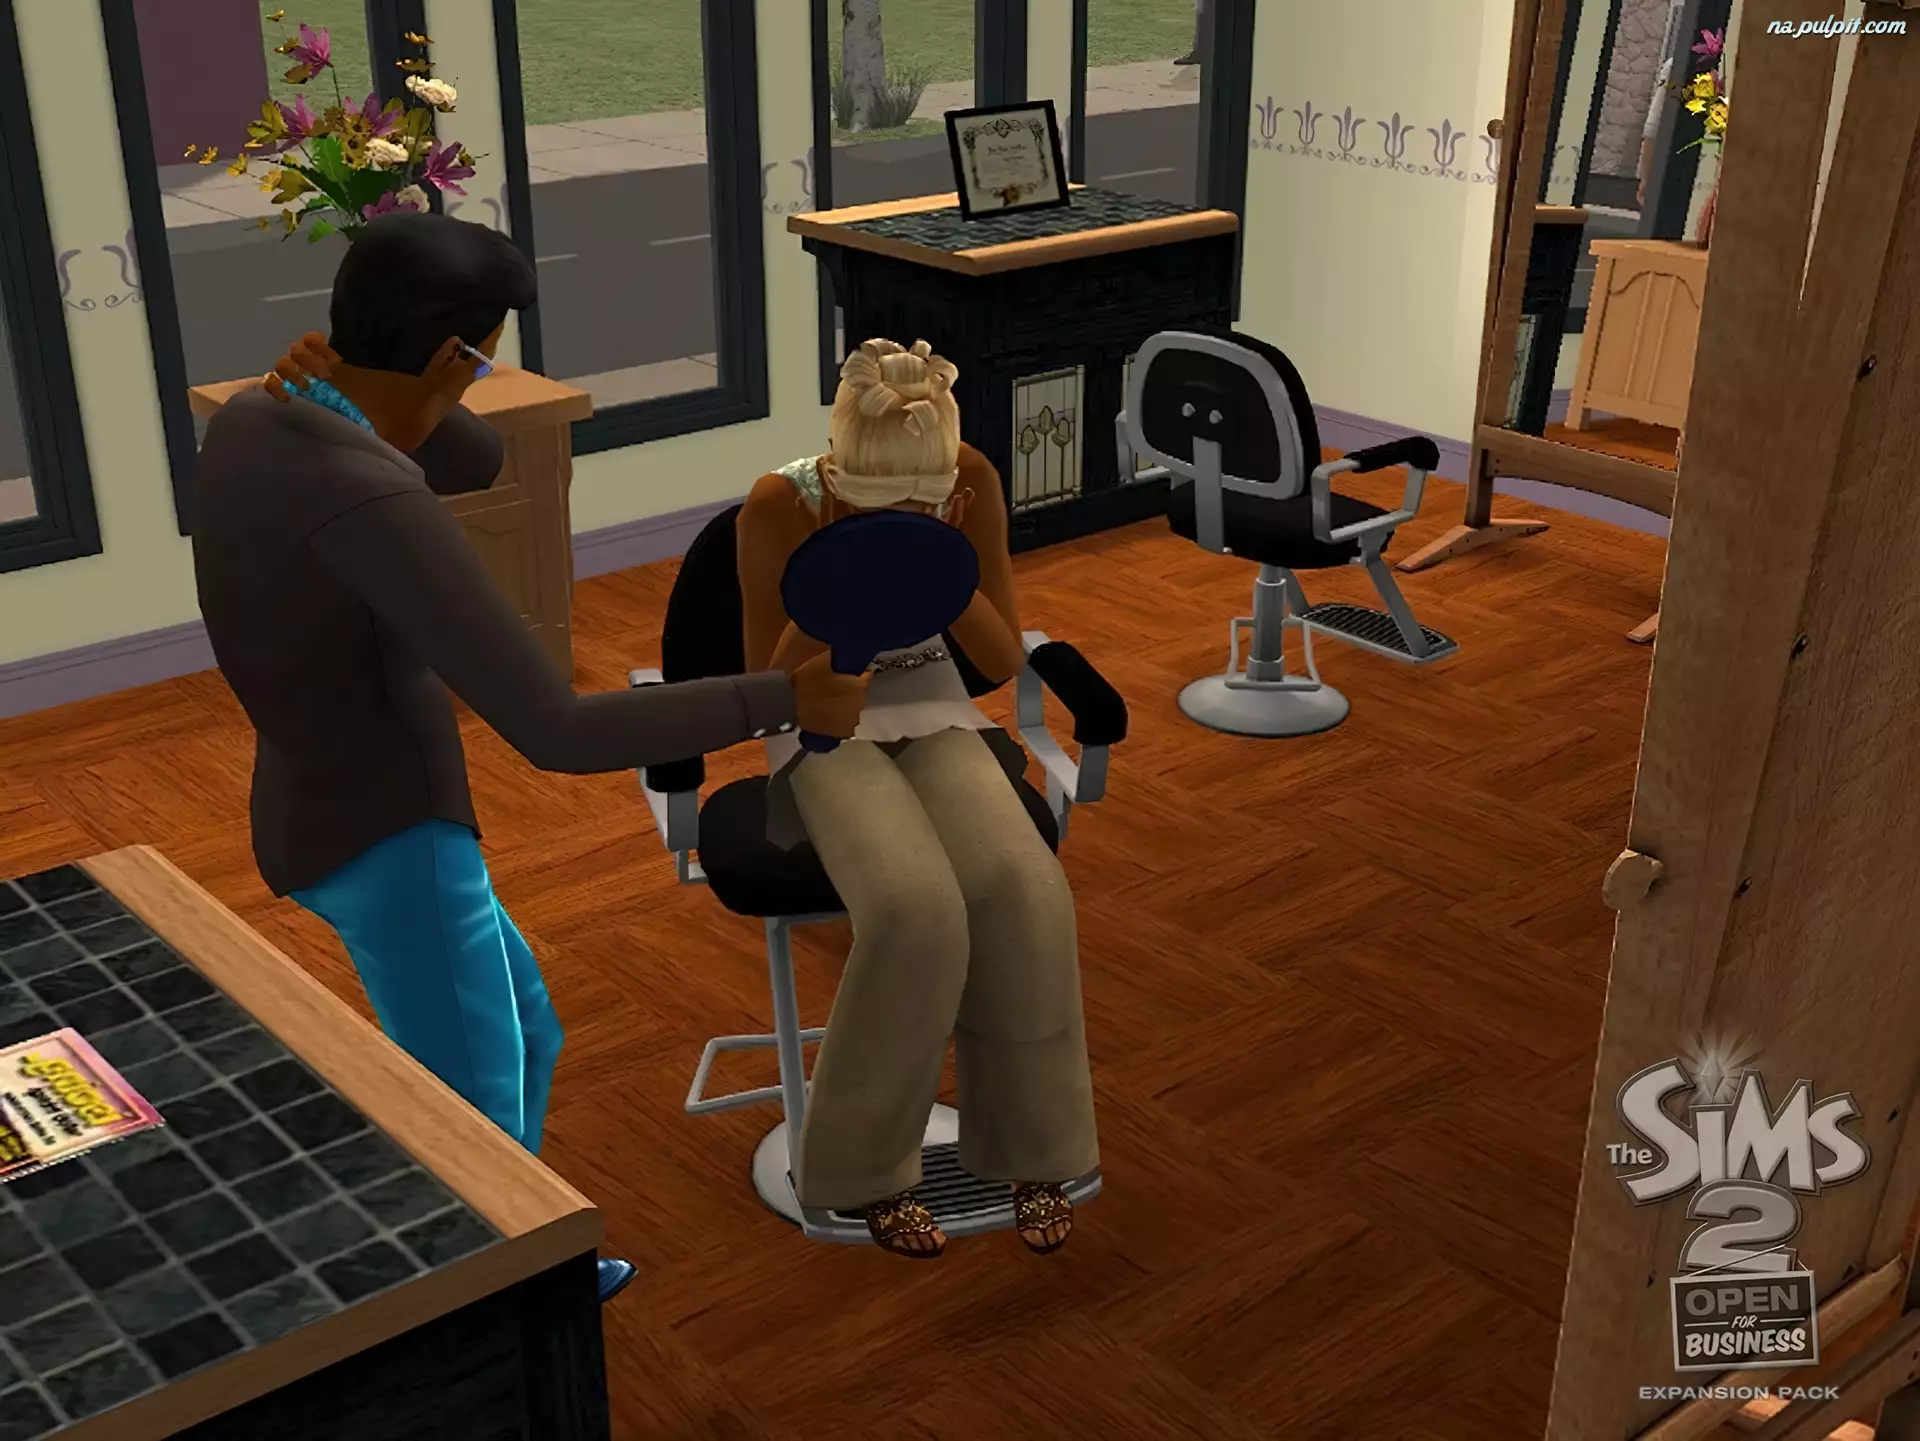 Open Business, The Sims 2